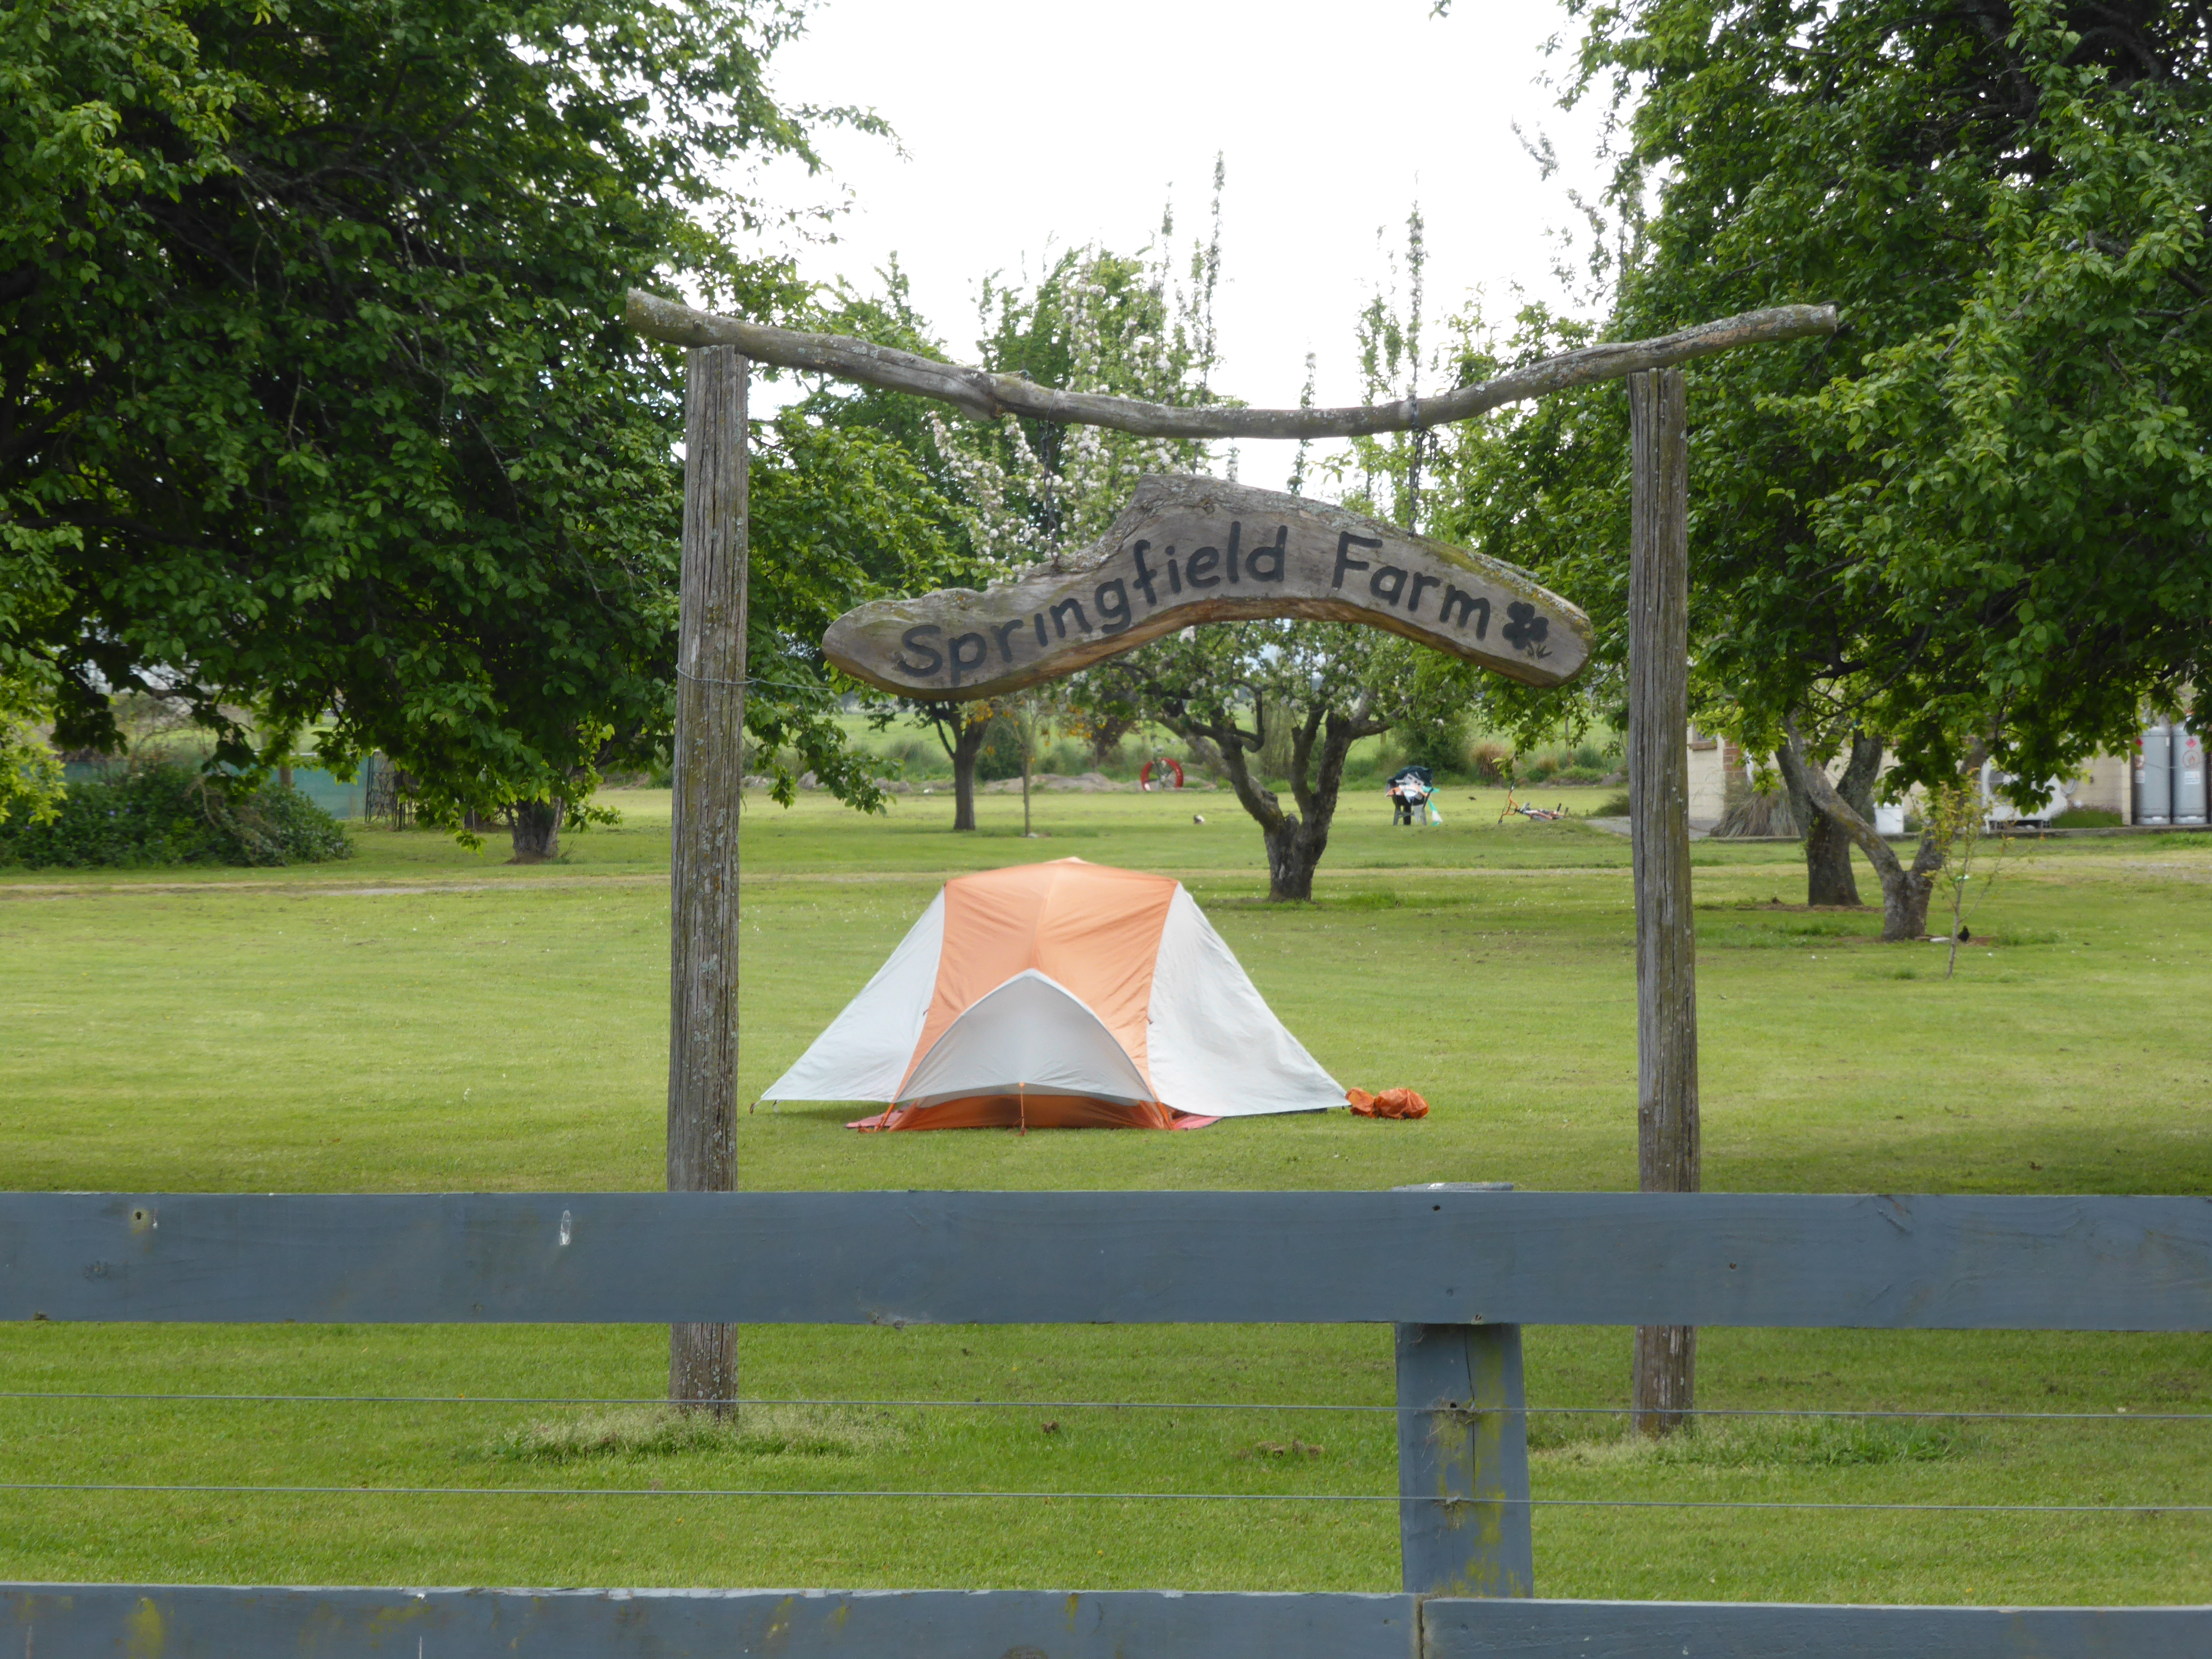 a tent set up in a field, framed by a farm sign